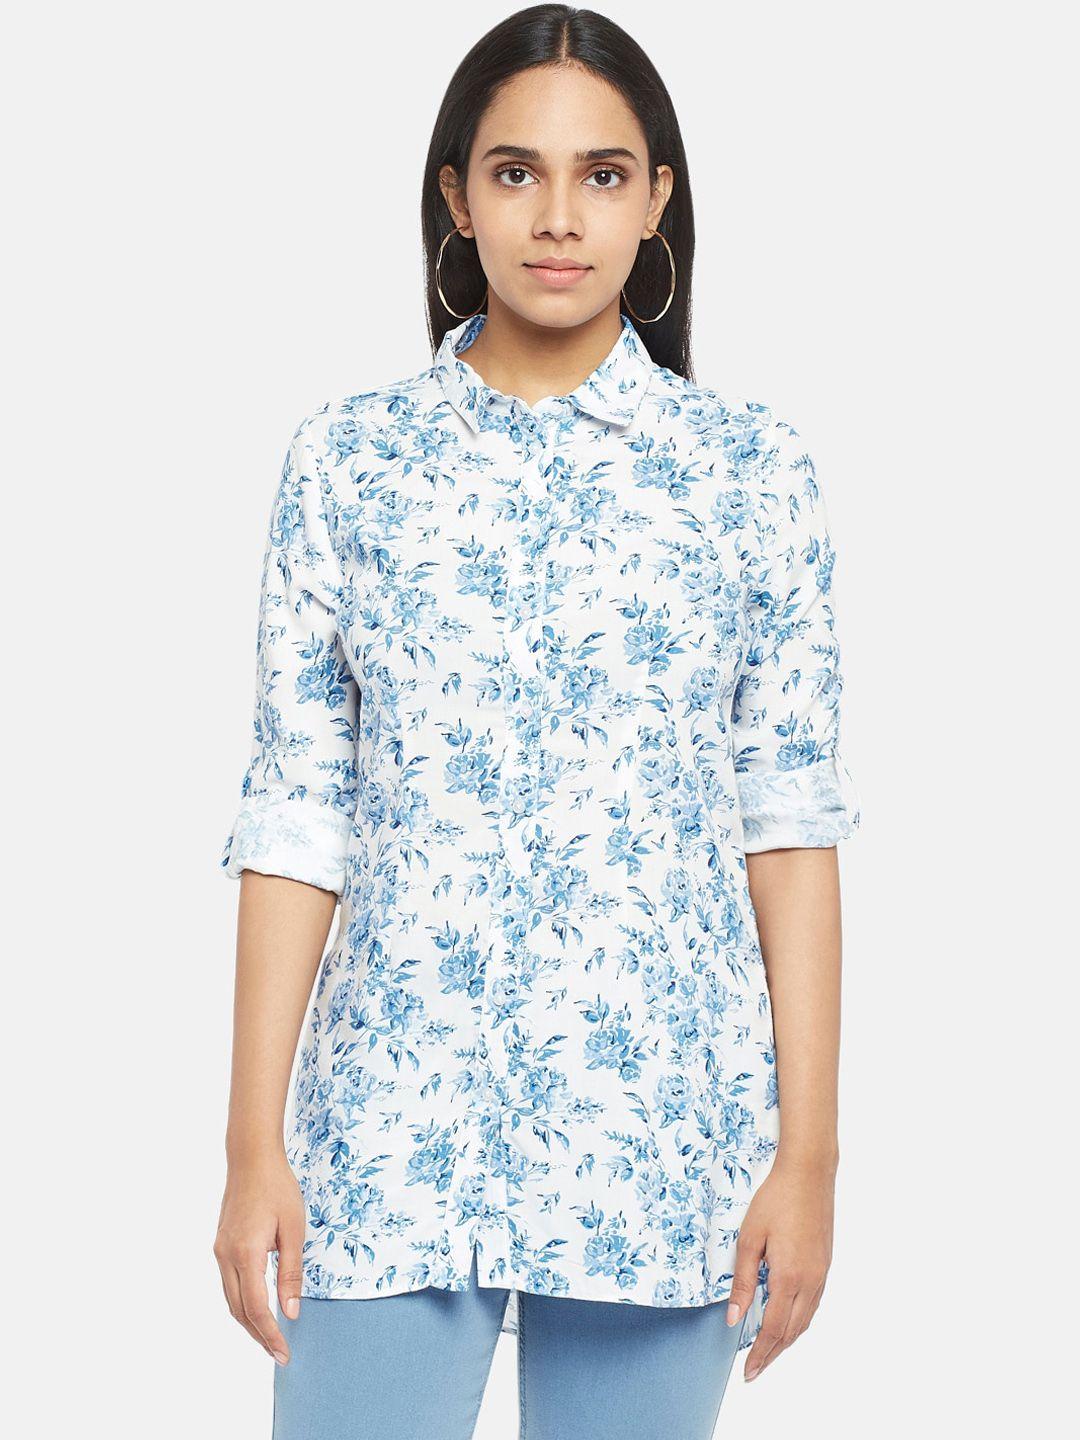 honey-by-pantaloons-women-blue-&-white-floral-opaque-printed-casual-shirt